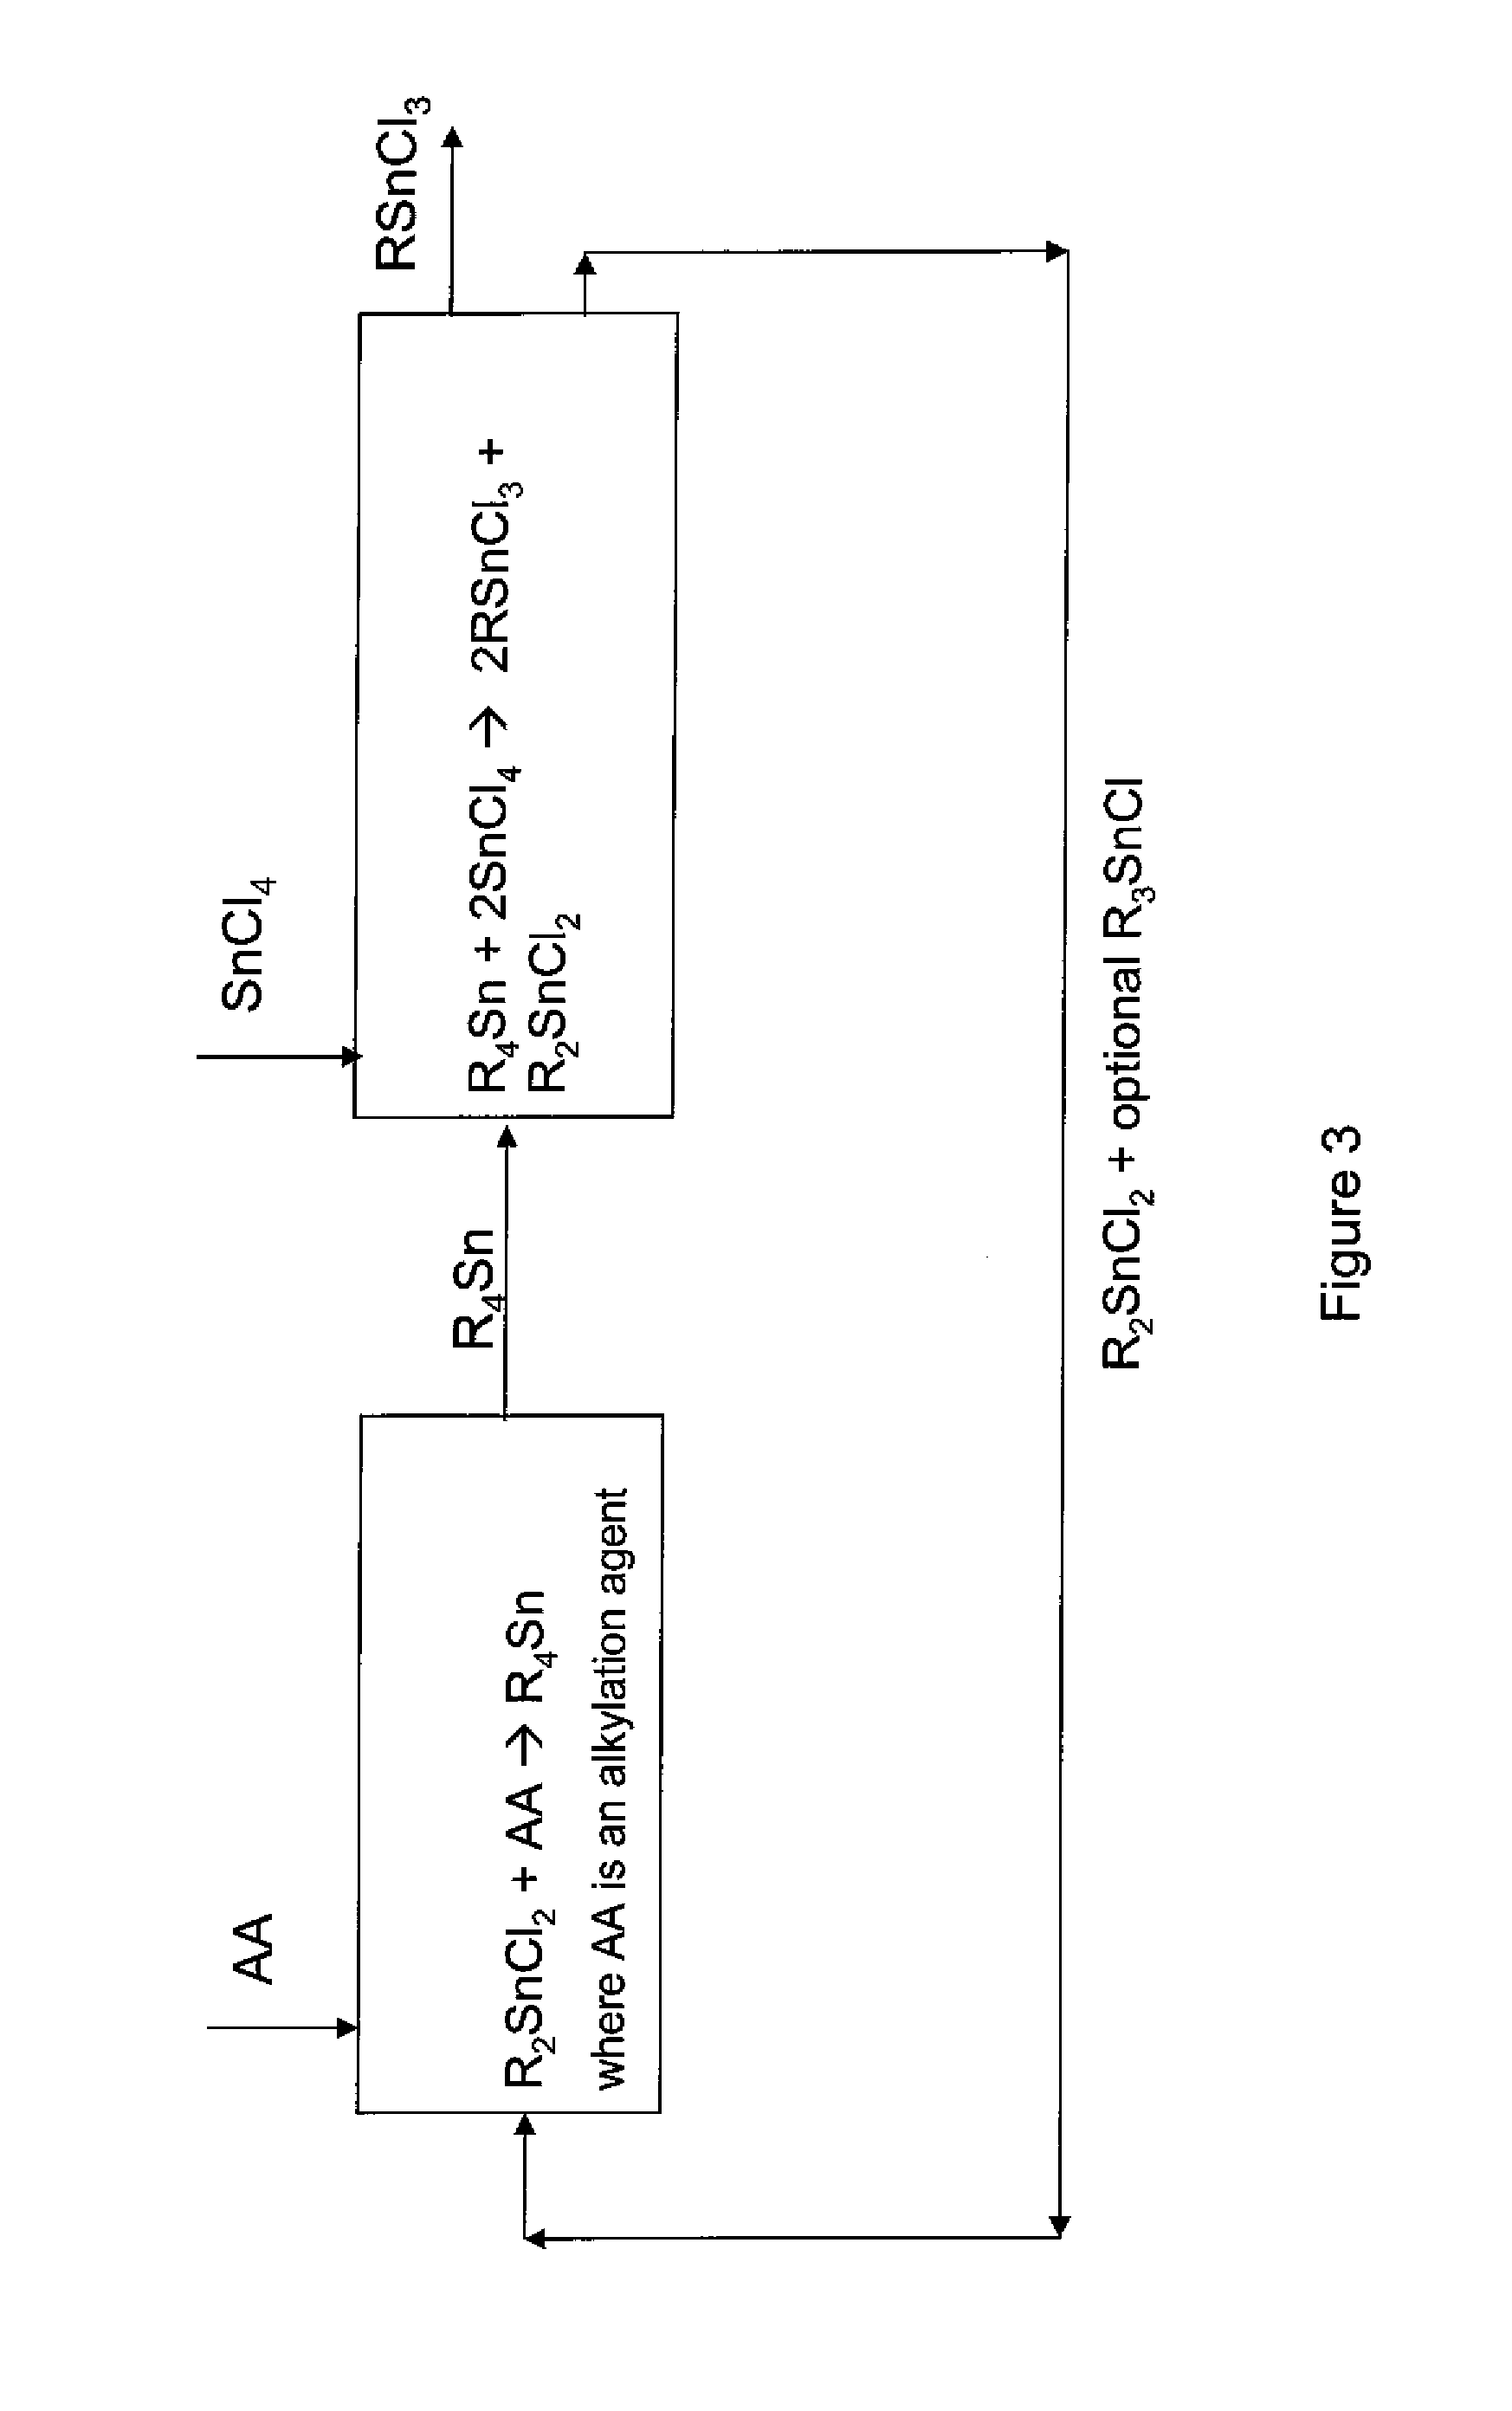 Process For Preparing Monoalkyltin Trihalides and Dialkyltin Dihalides